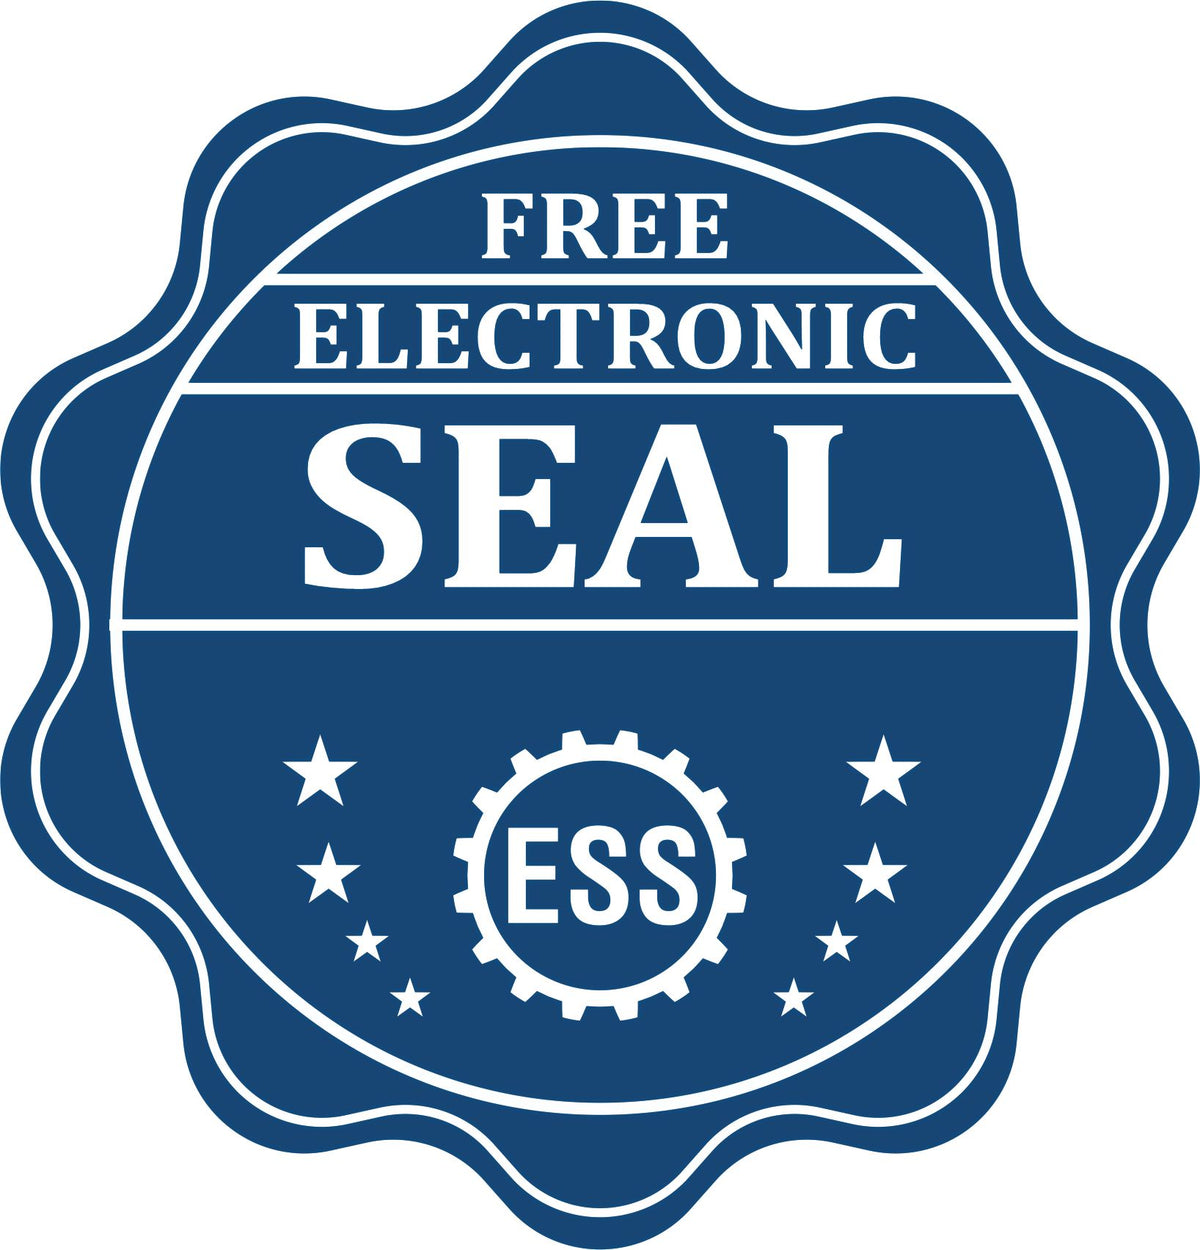 A badge showing a free electronic seal for the Heavy Duty Cast Iron Idaho Land Surveyor Seal Embosser with stars and the ESS gear on the emblem.